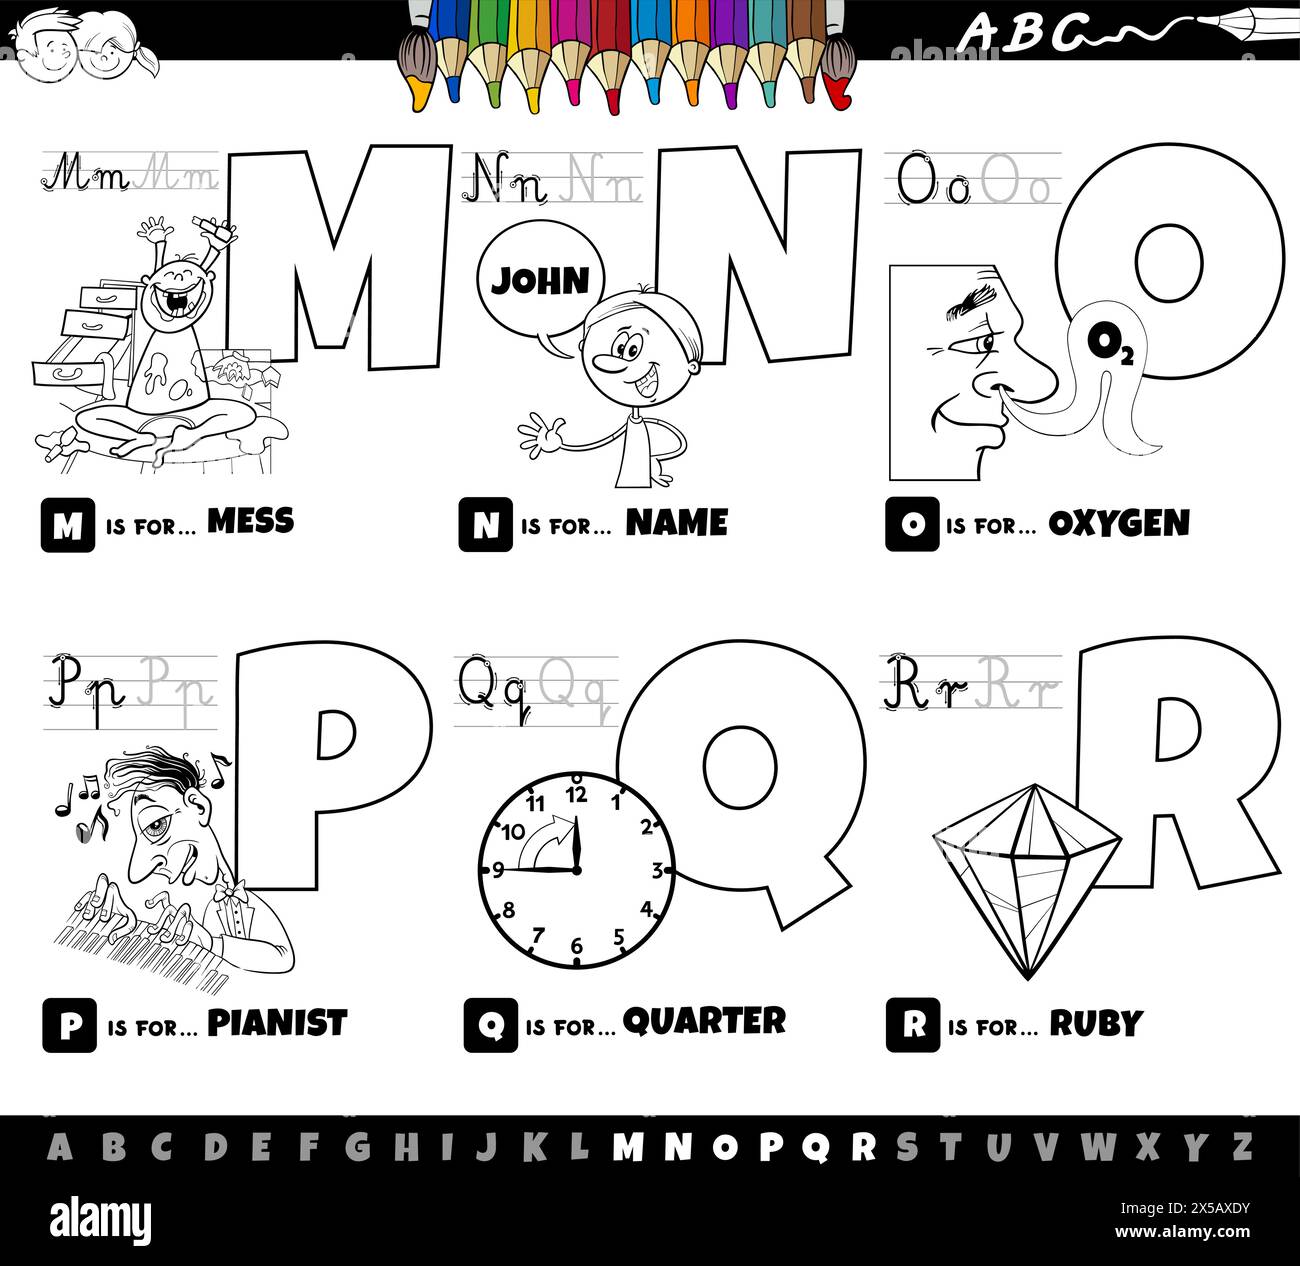 Black and white cartoon illustration of capital letters from alphabet educational set for reading and writing practise for children from M to R colori Stock Vector